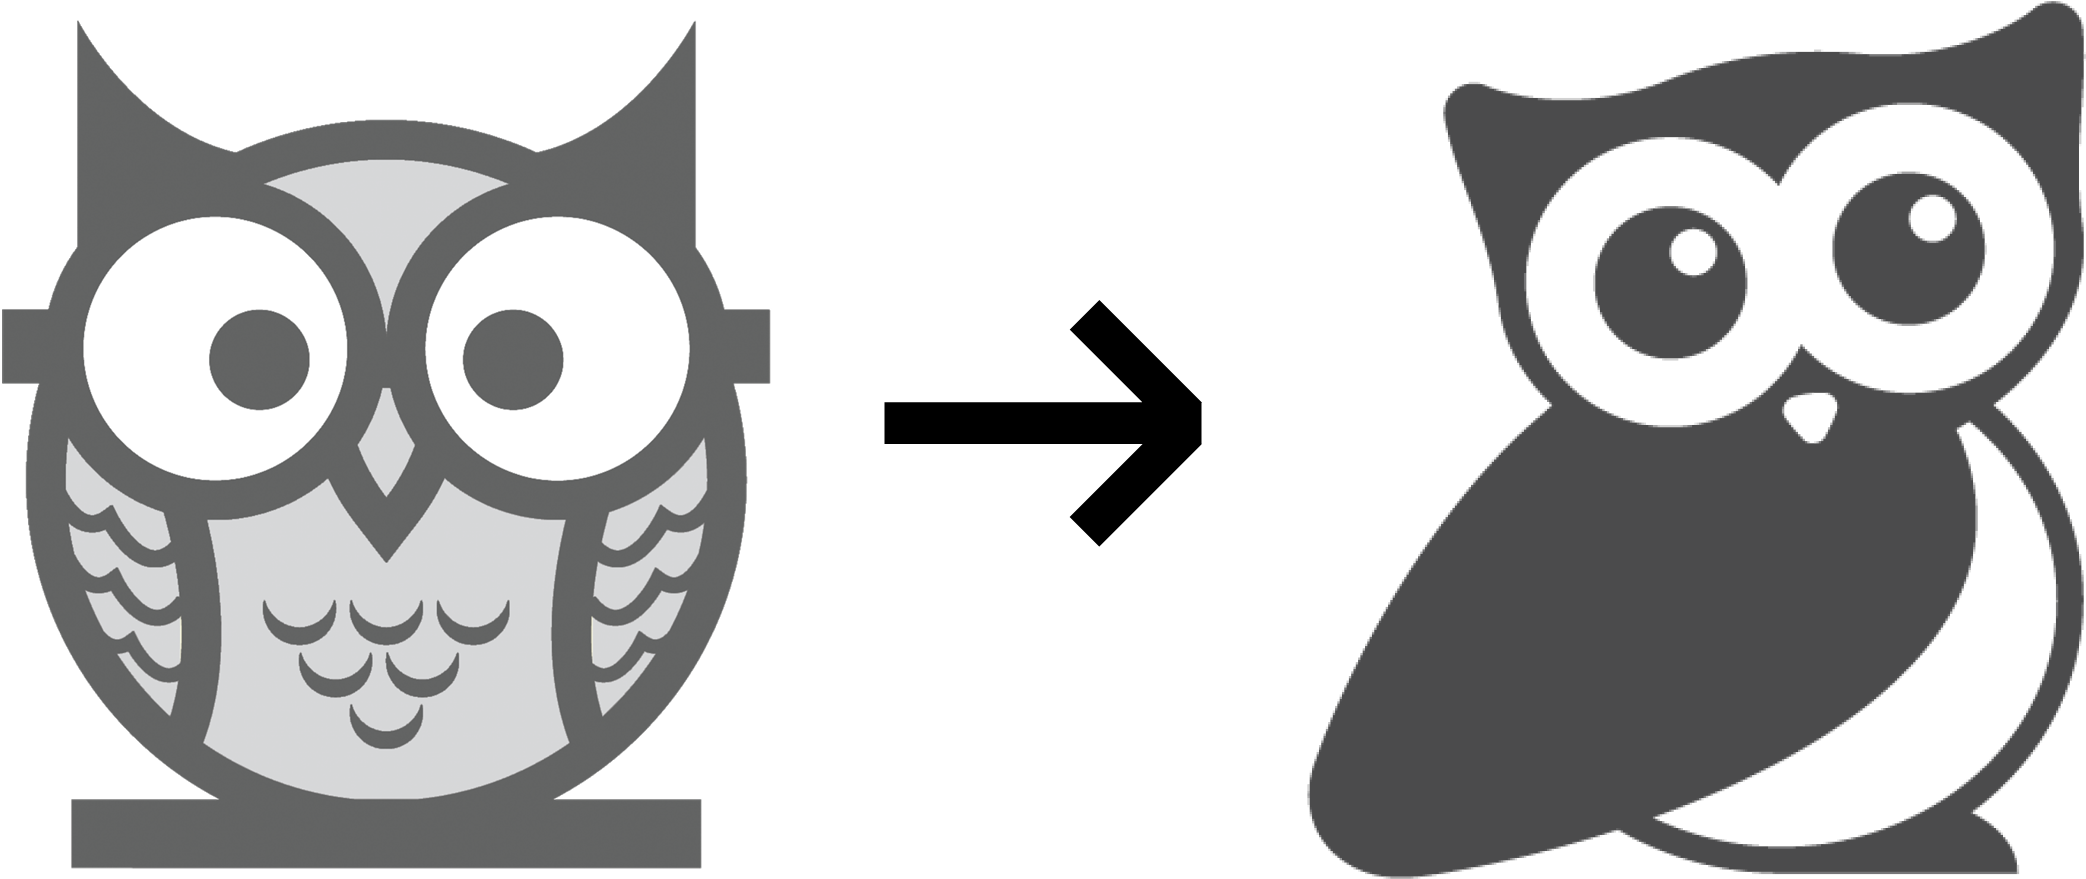 As A Favicon Or In White On Colored Backgrounds, Which - Owl Logo Designs (2500x1250)